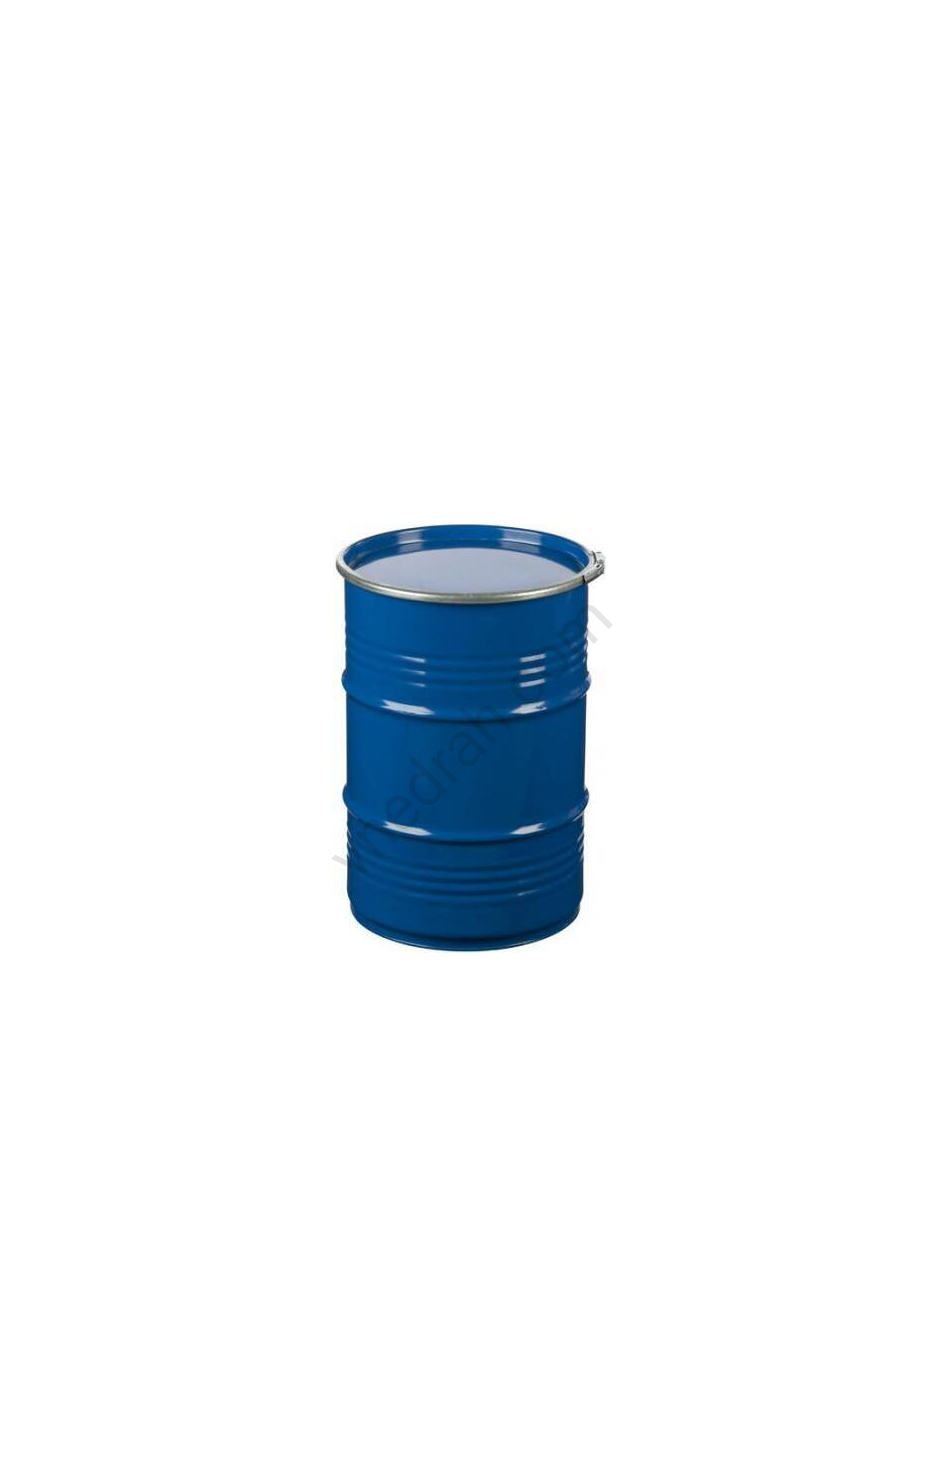 Transformer oil - image 17 | Product